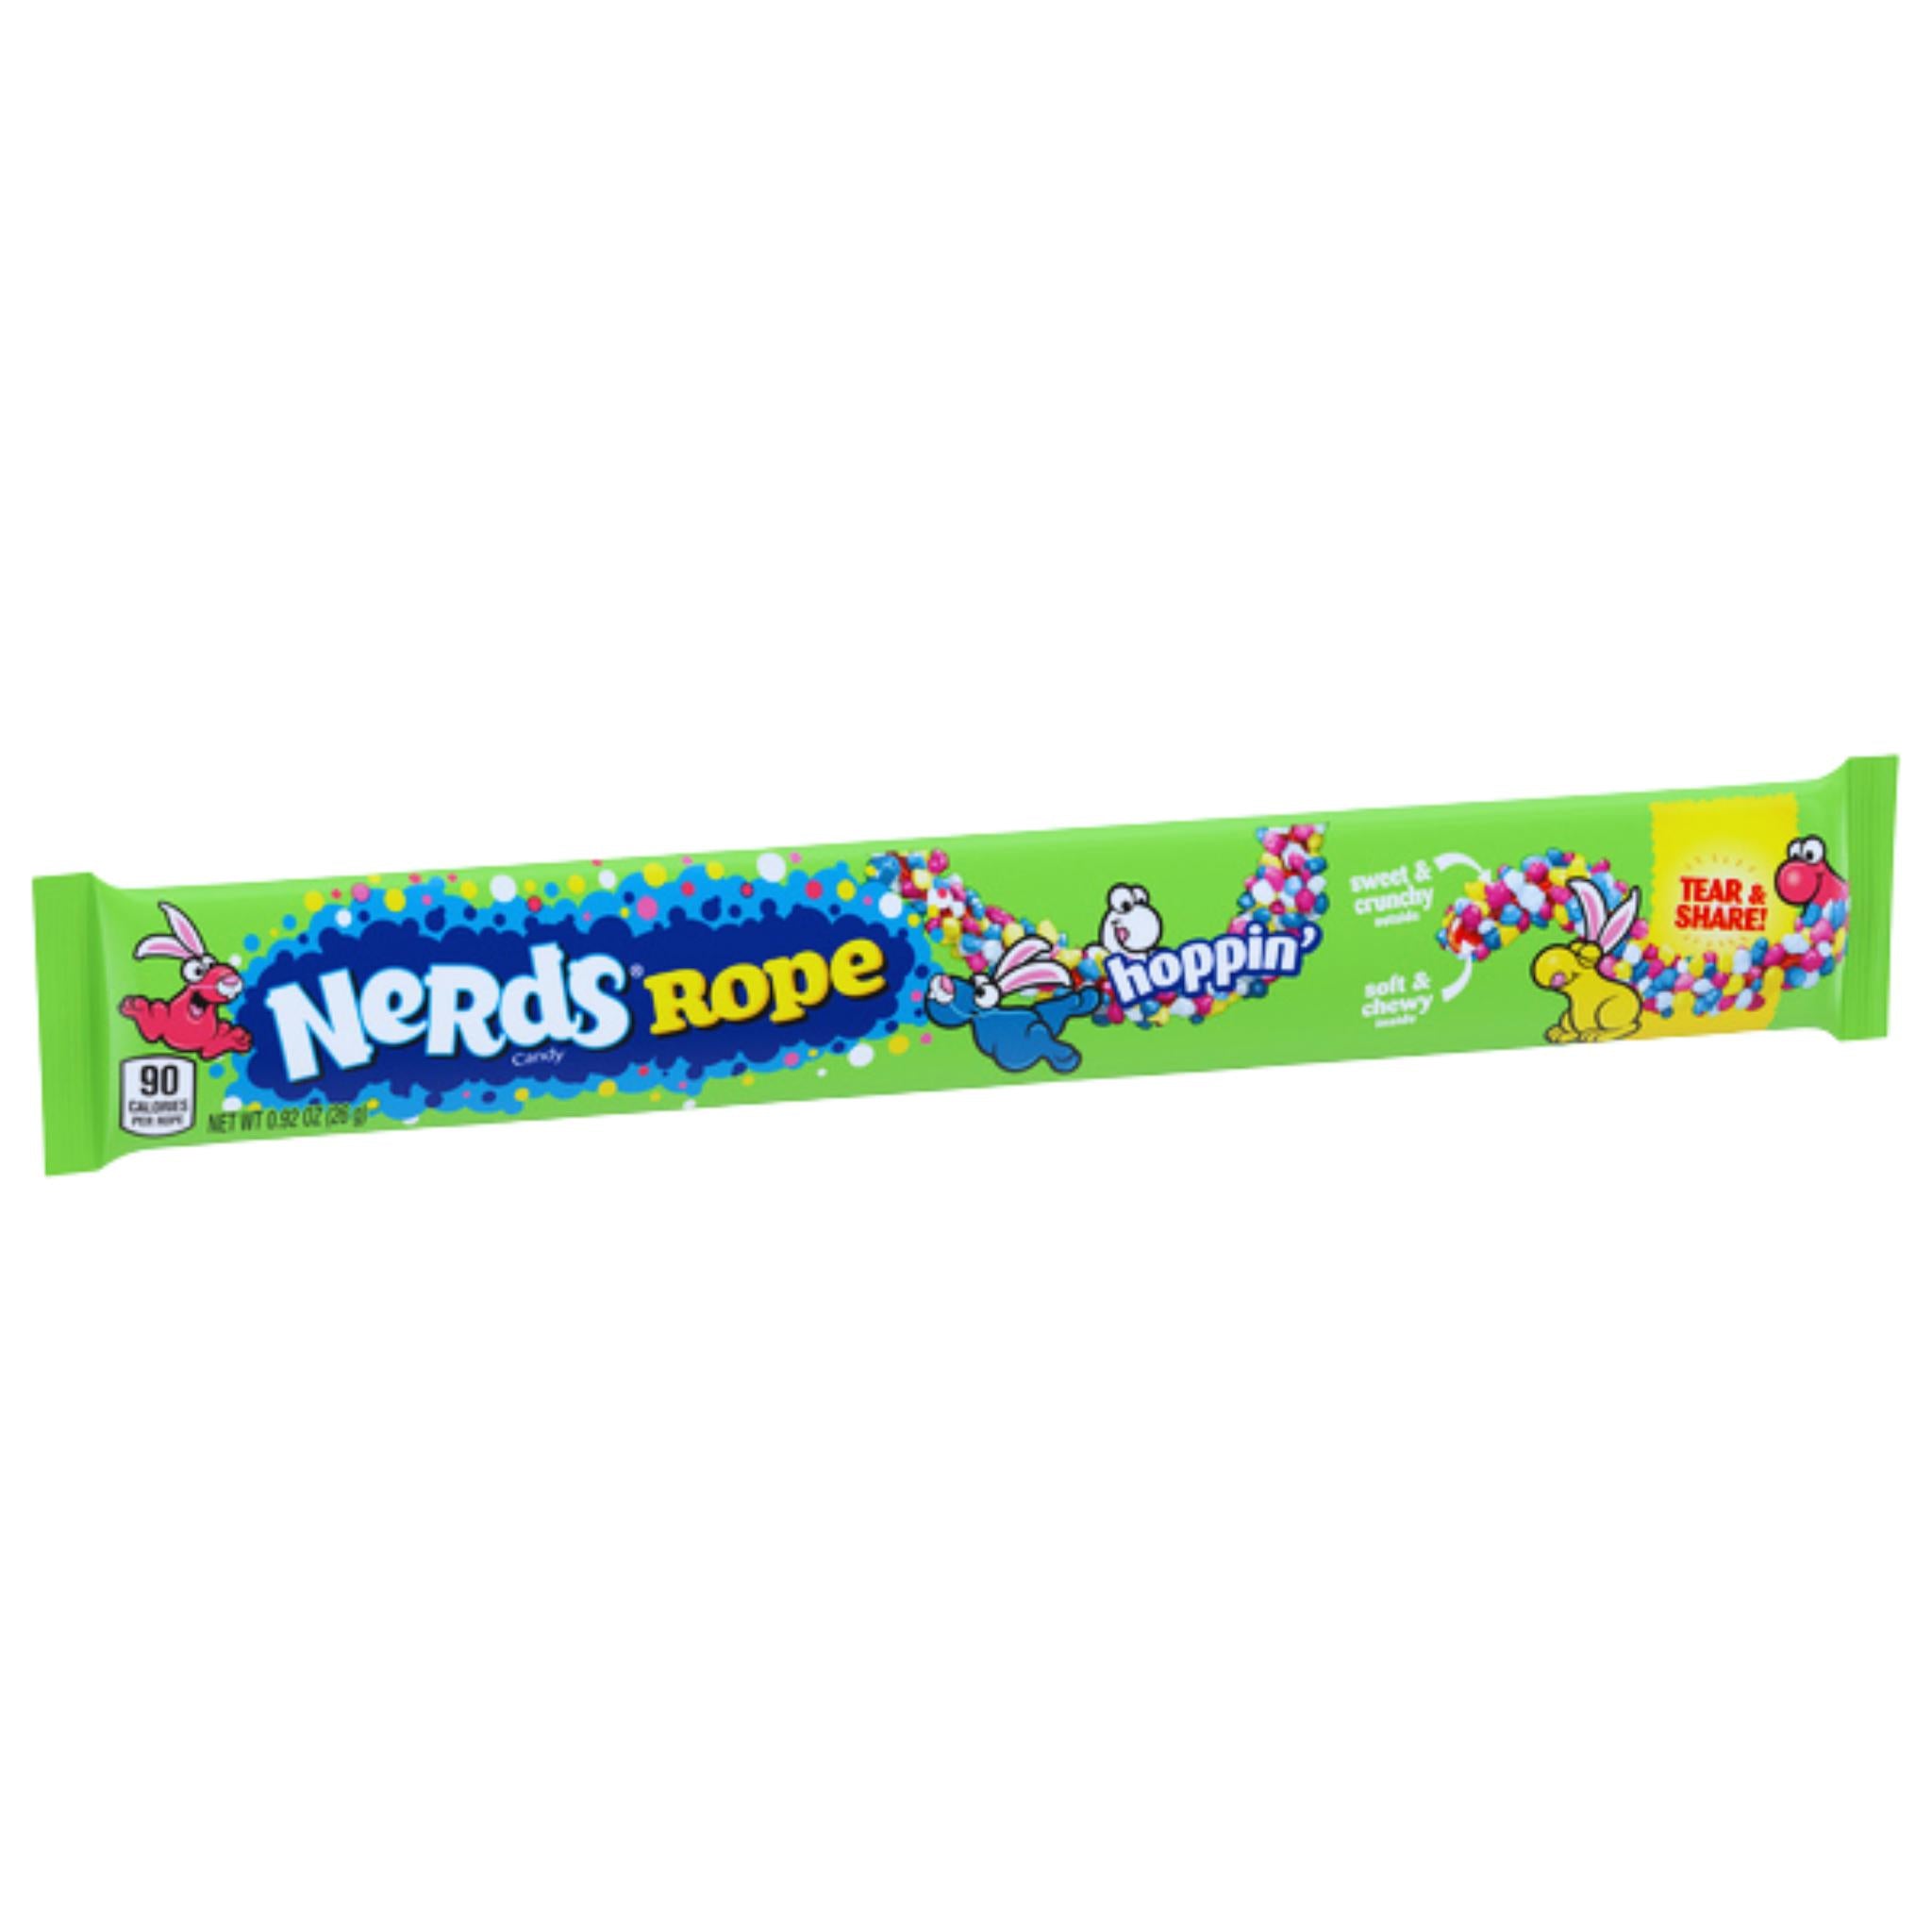 Nerds Rope Hoppin' (LIMITED EDITION) - 26g